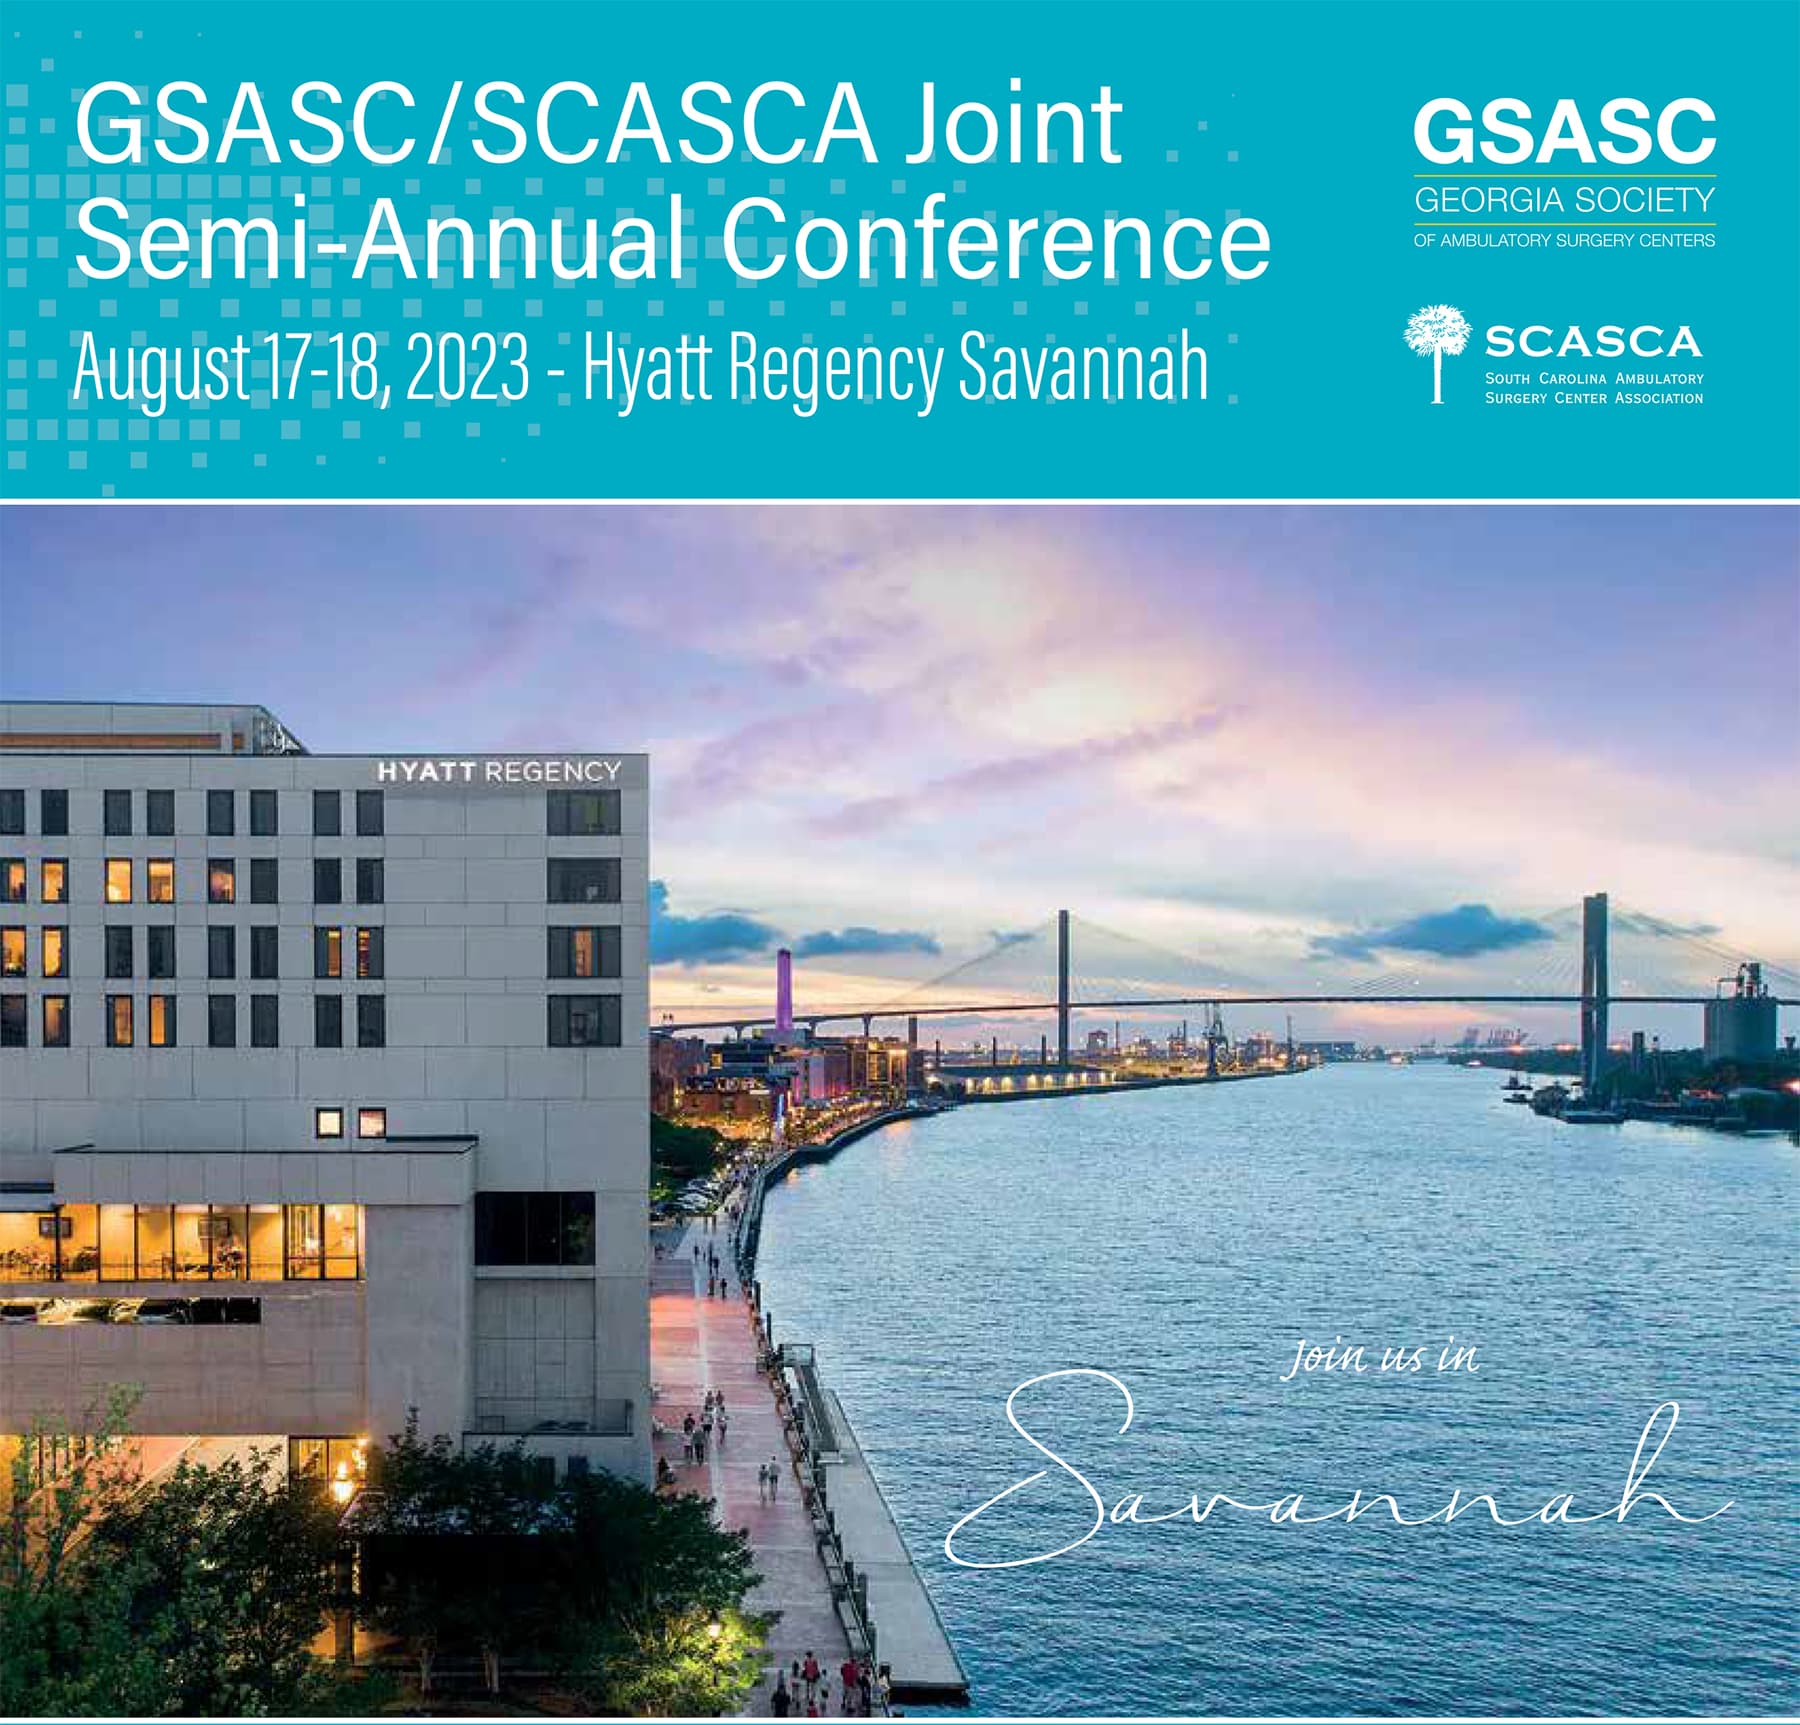 GSASC/SCASCA Joint Semi-Annual Conference